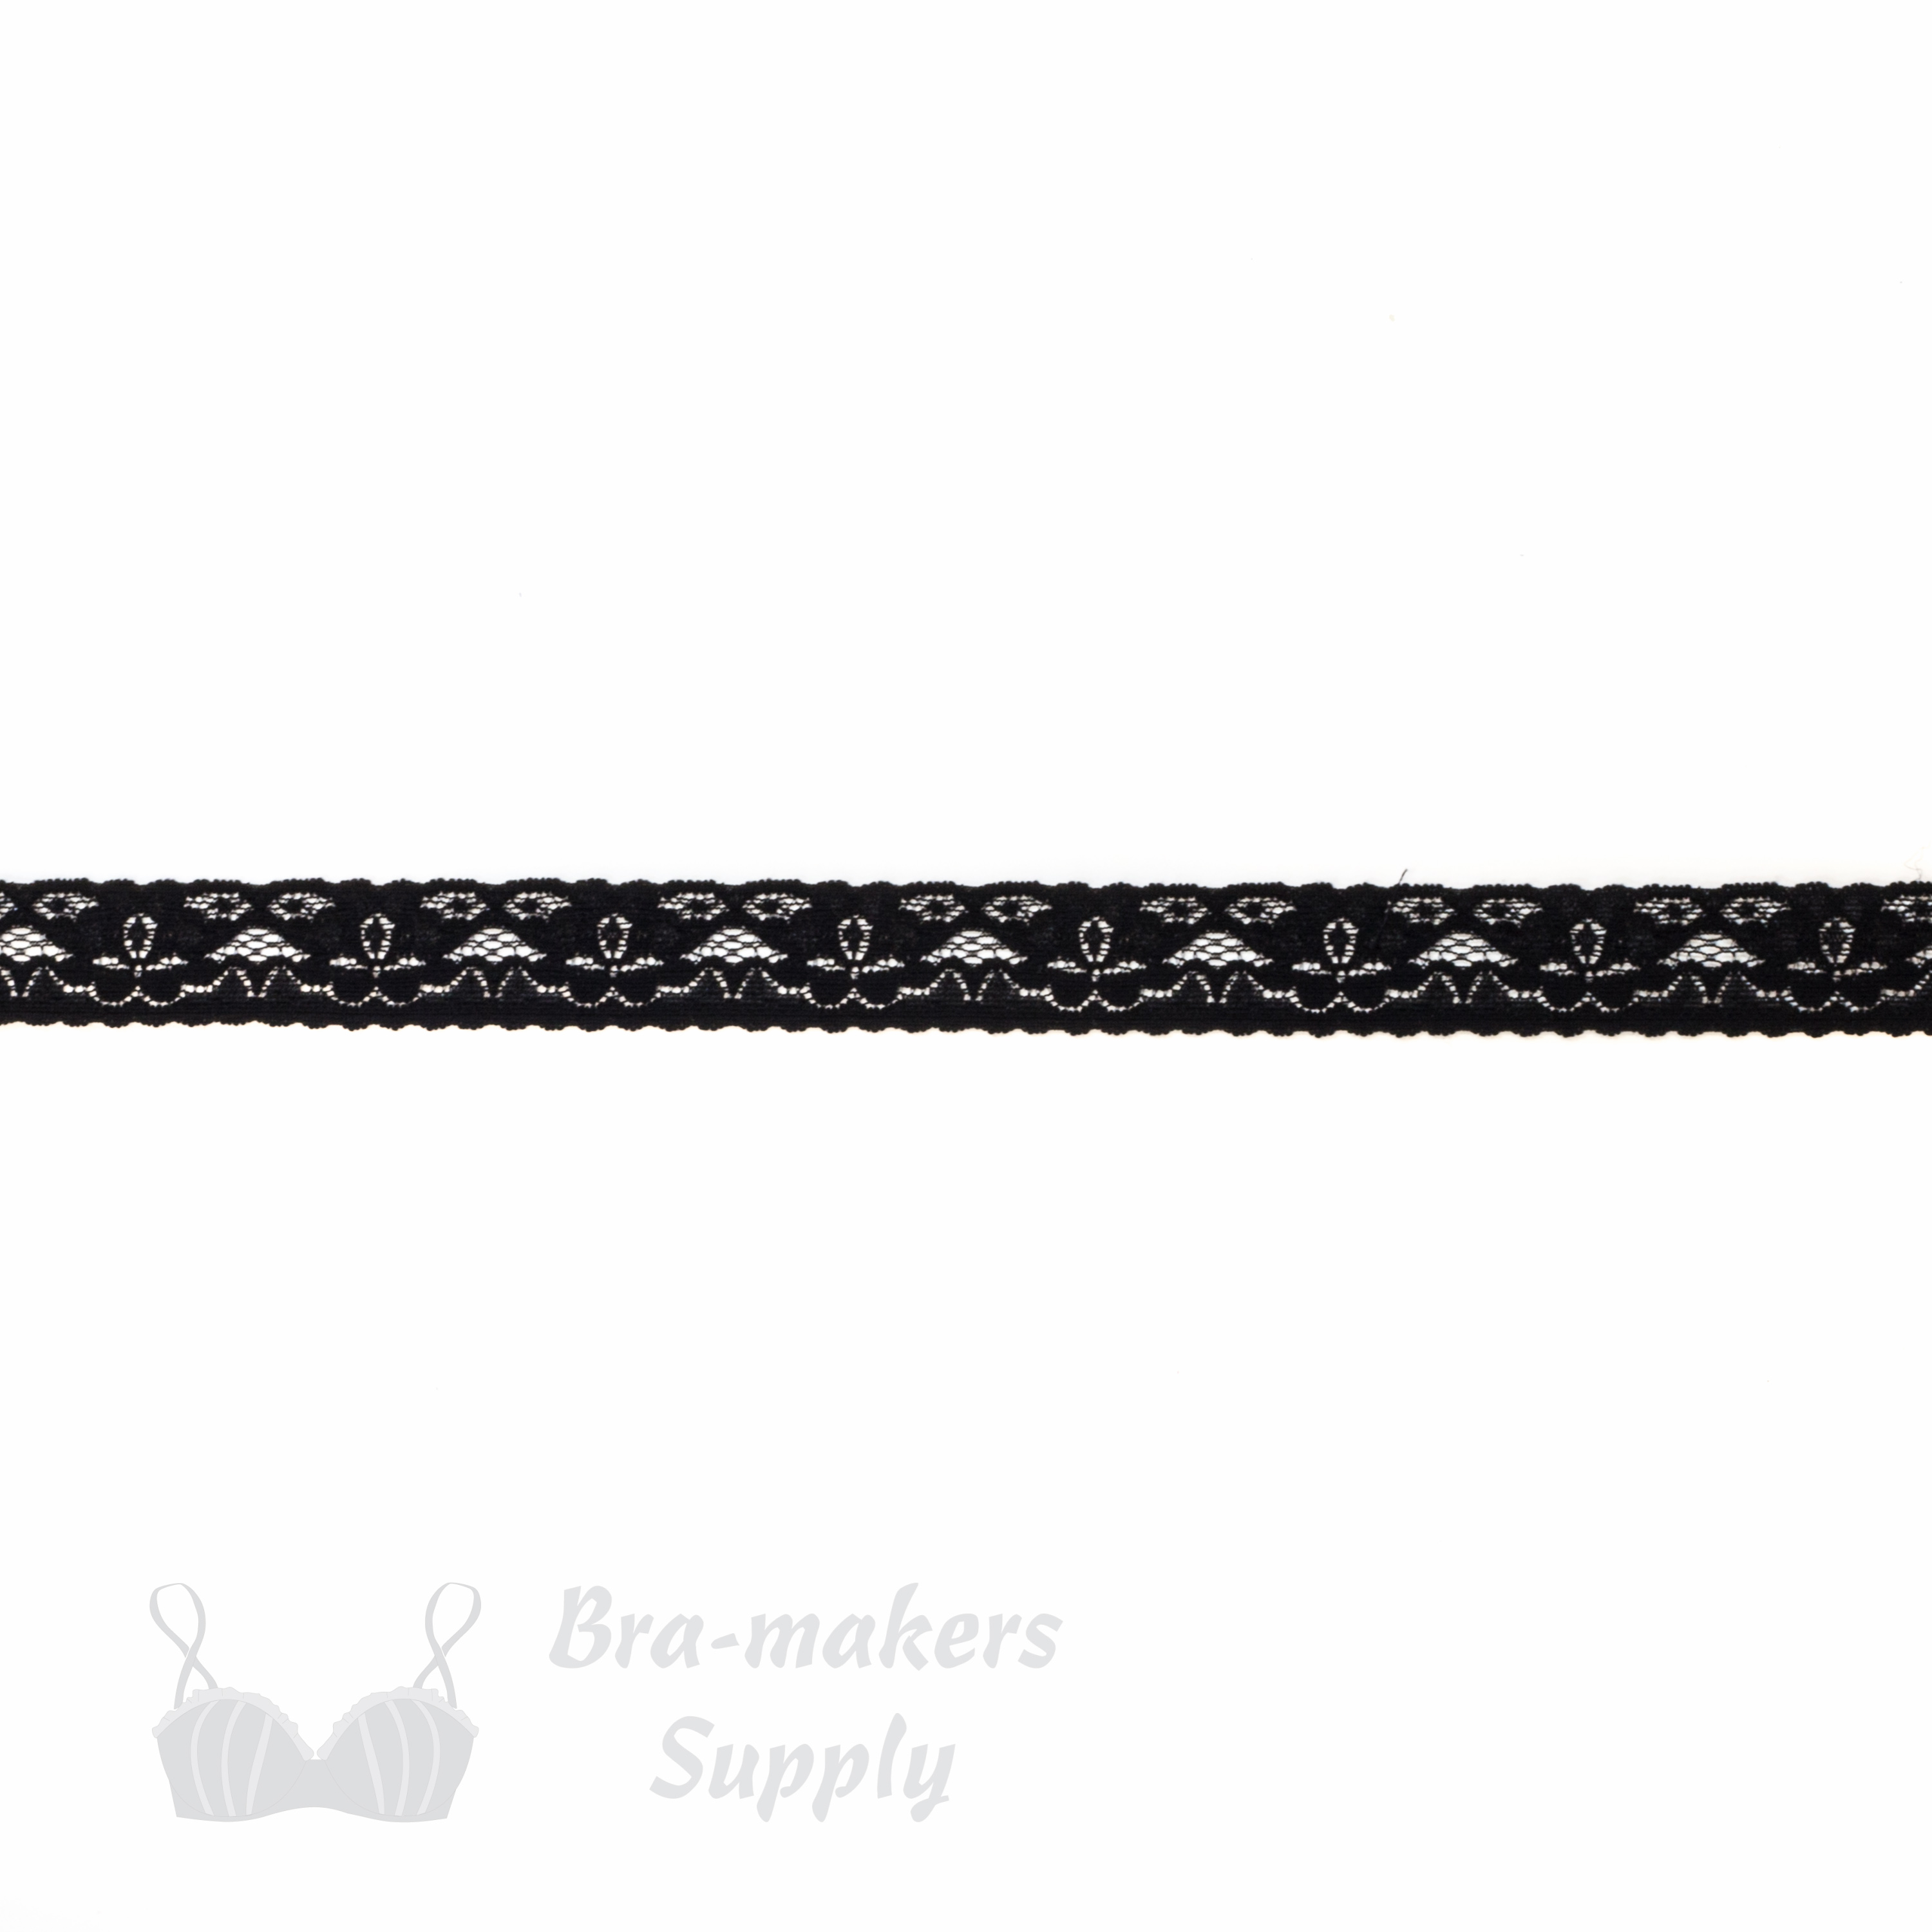 stretch laces - 1 inch - 2.5 cm one inch black floral stretch lace edge LS-10 980 from Bra-Makers Supply